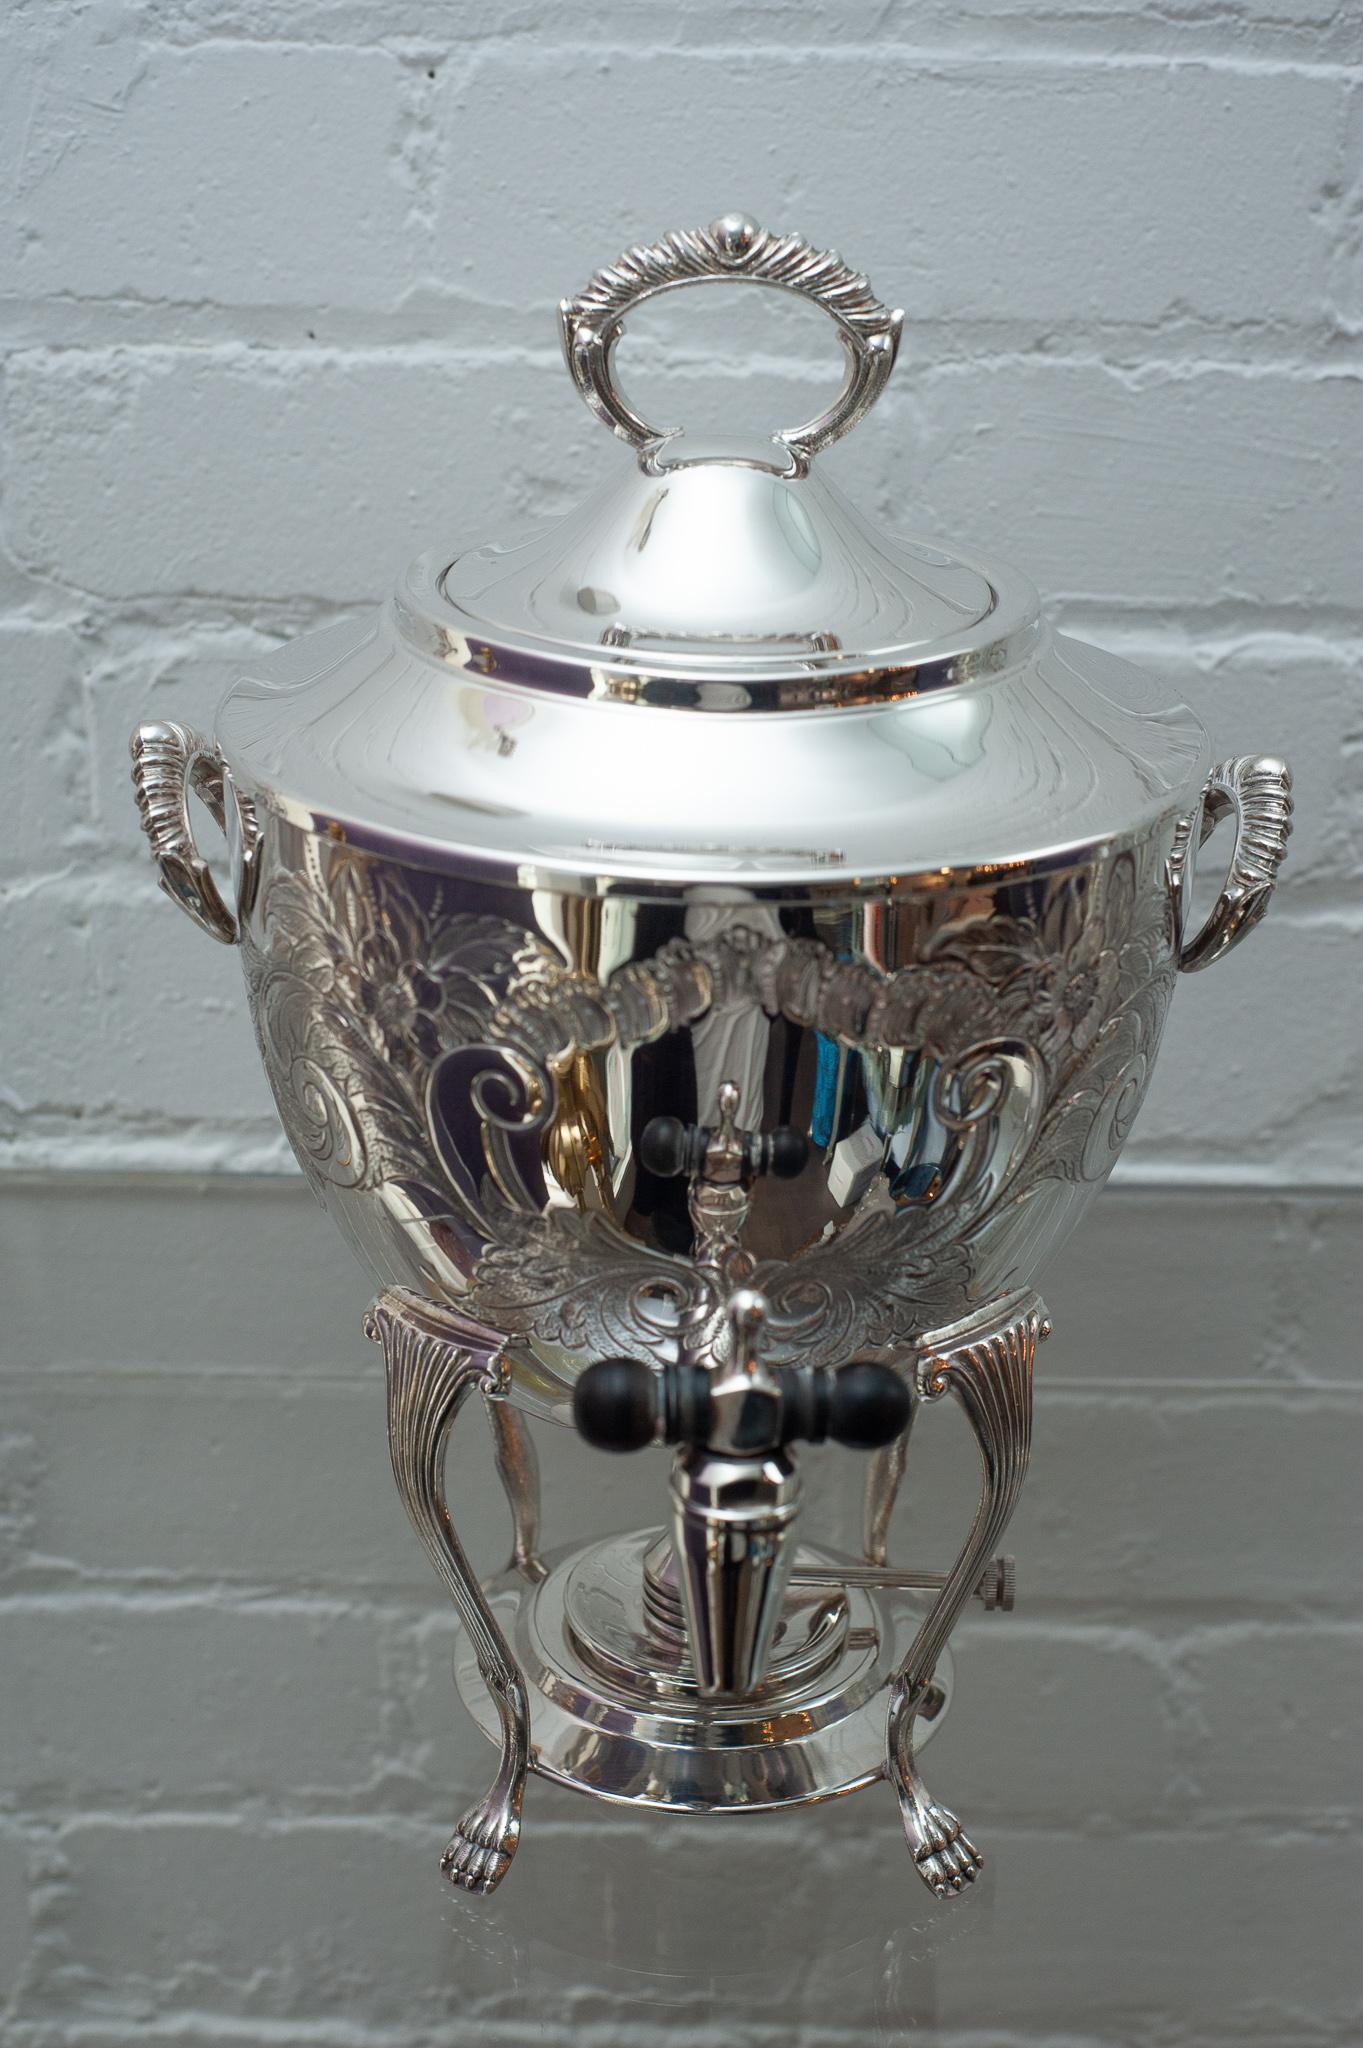 A stunning and large Silver-plate samovar / drink cask in silver-plate copper, made in Canada.